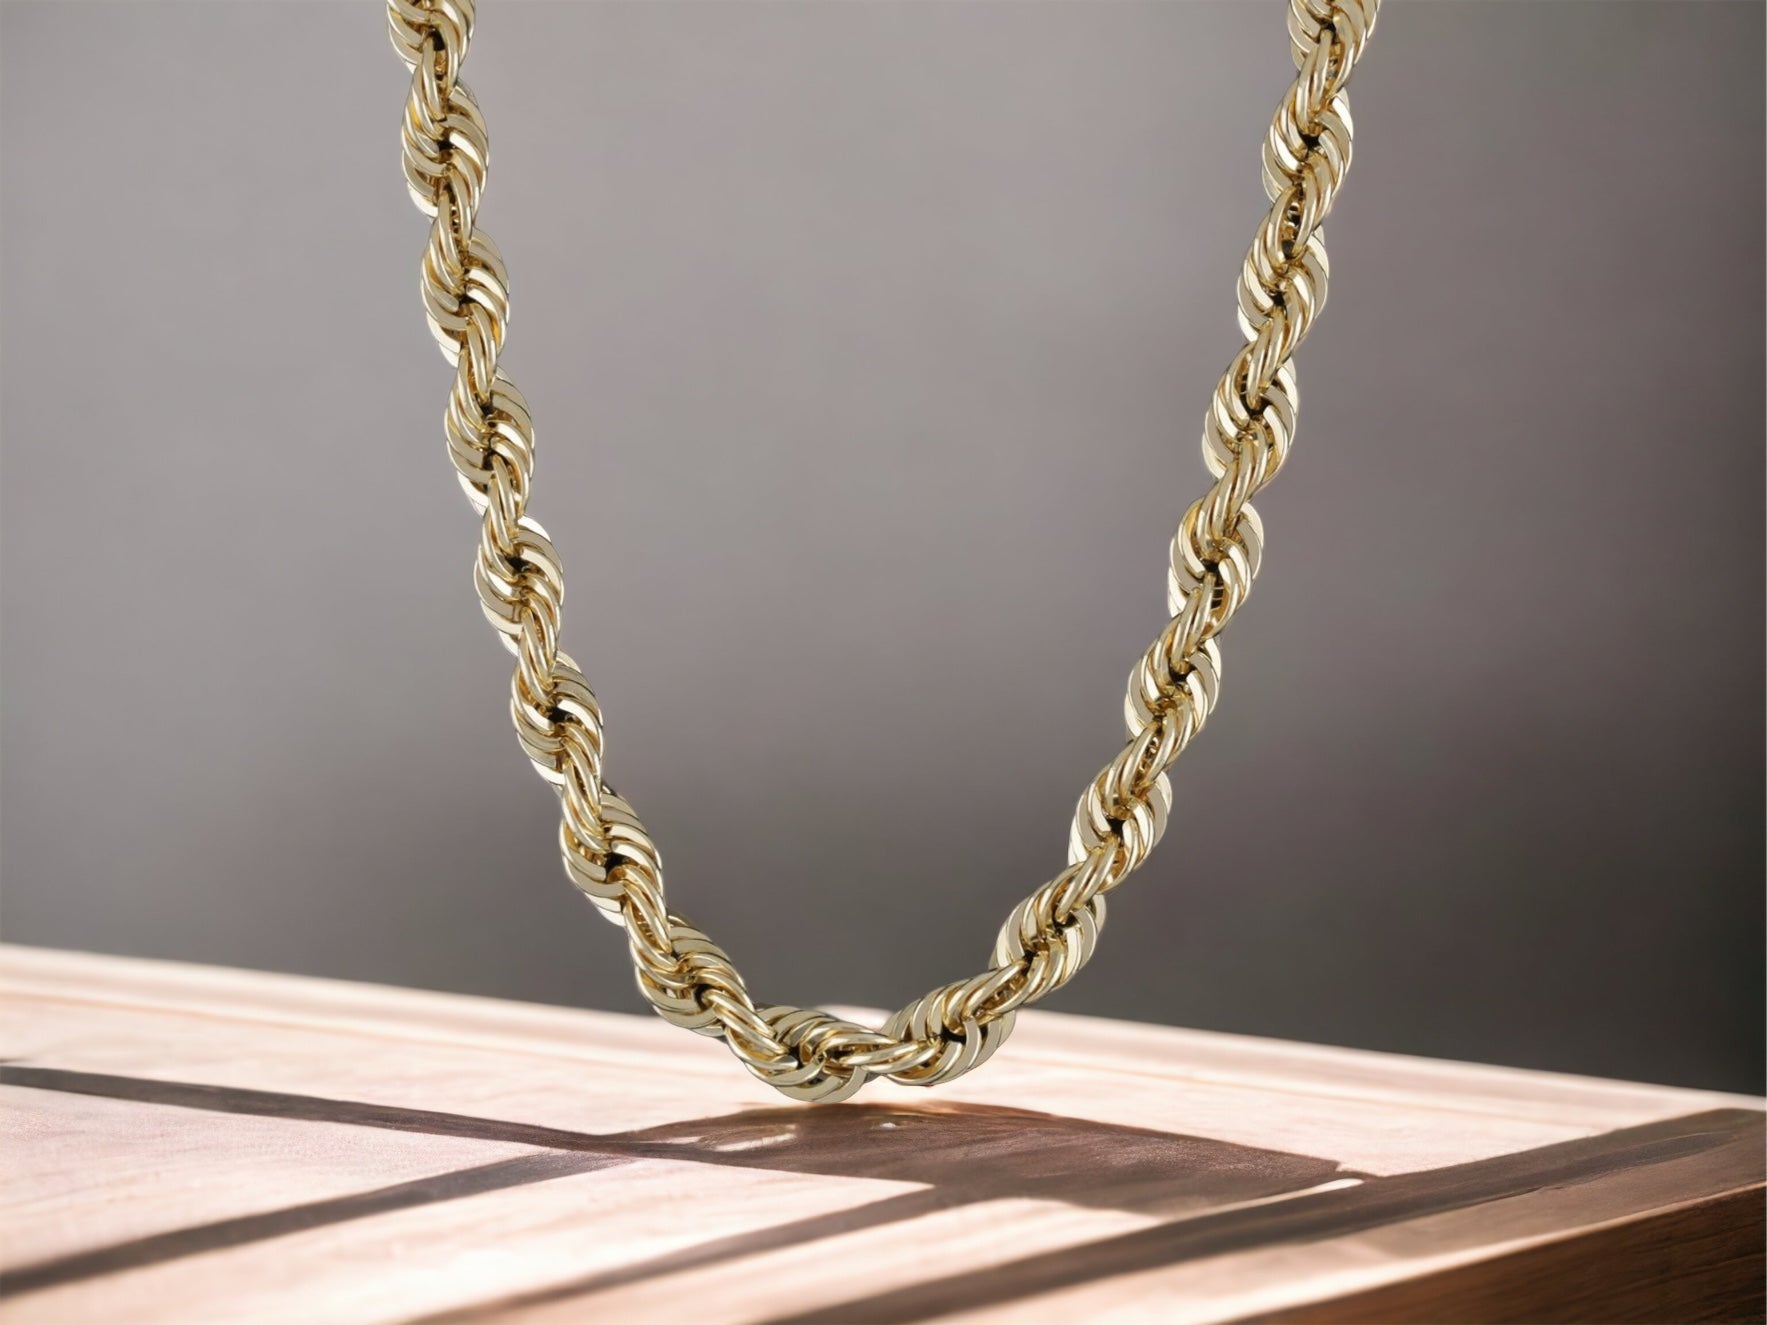 6mm 9ct solid Gold Rope Chain | 22" - 24"